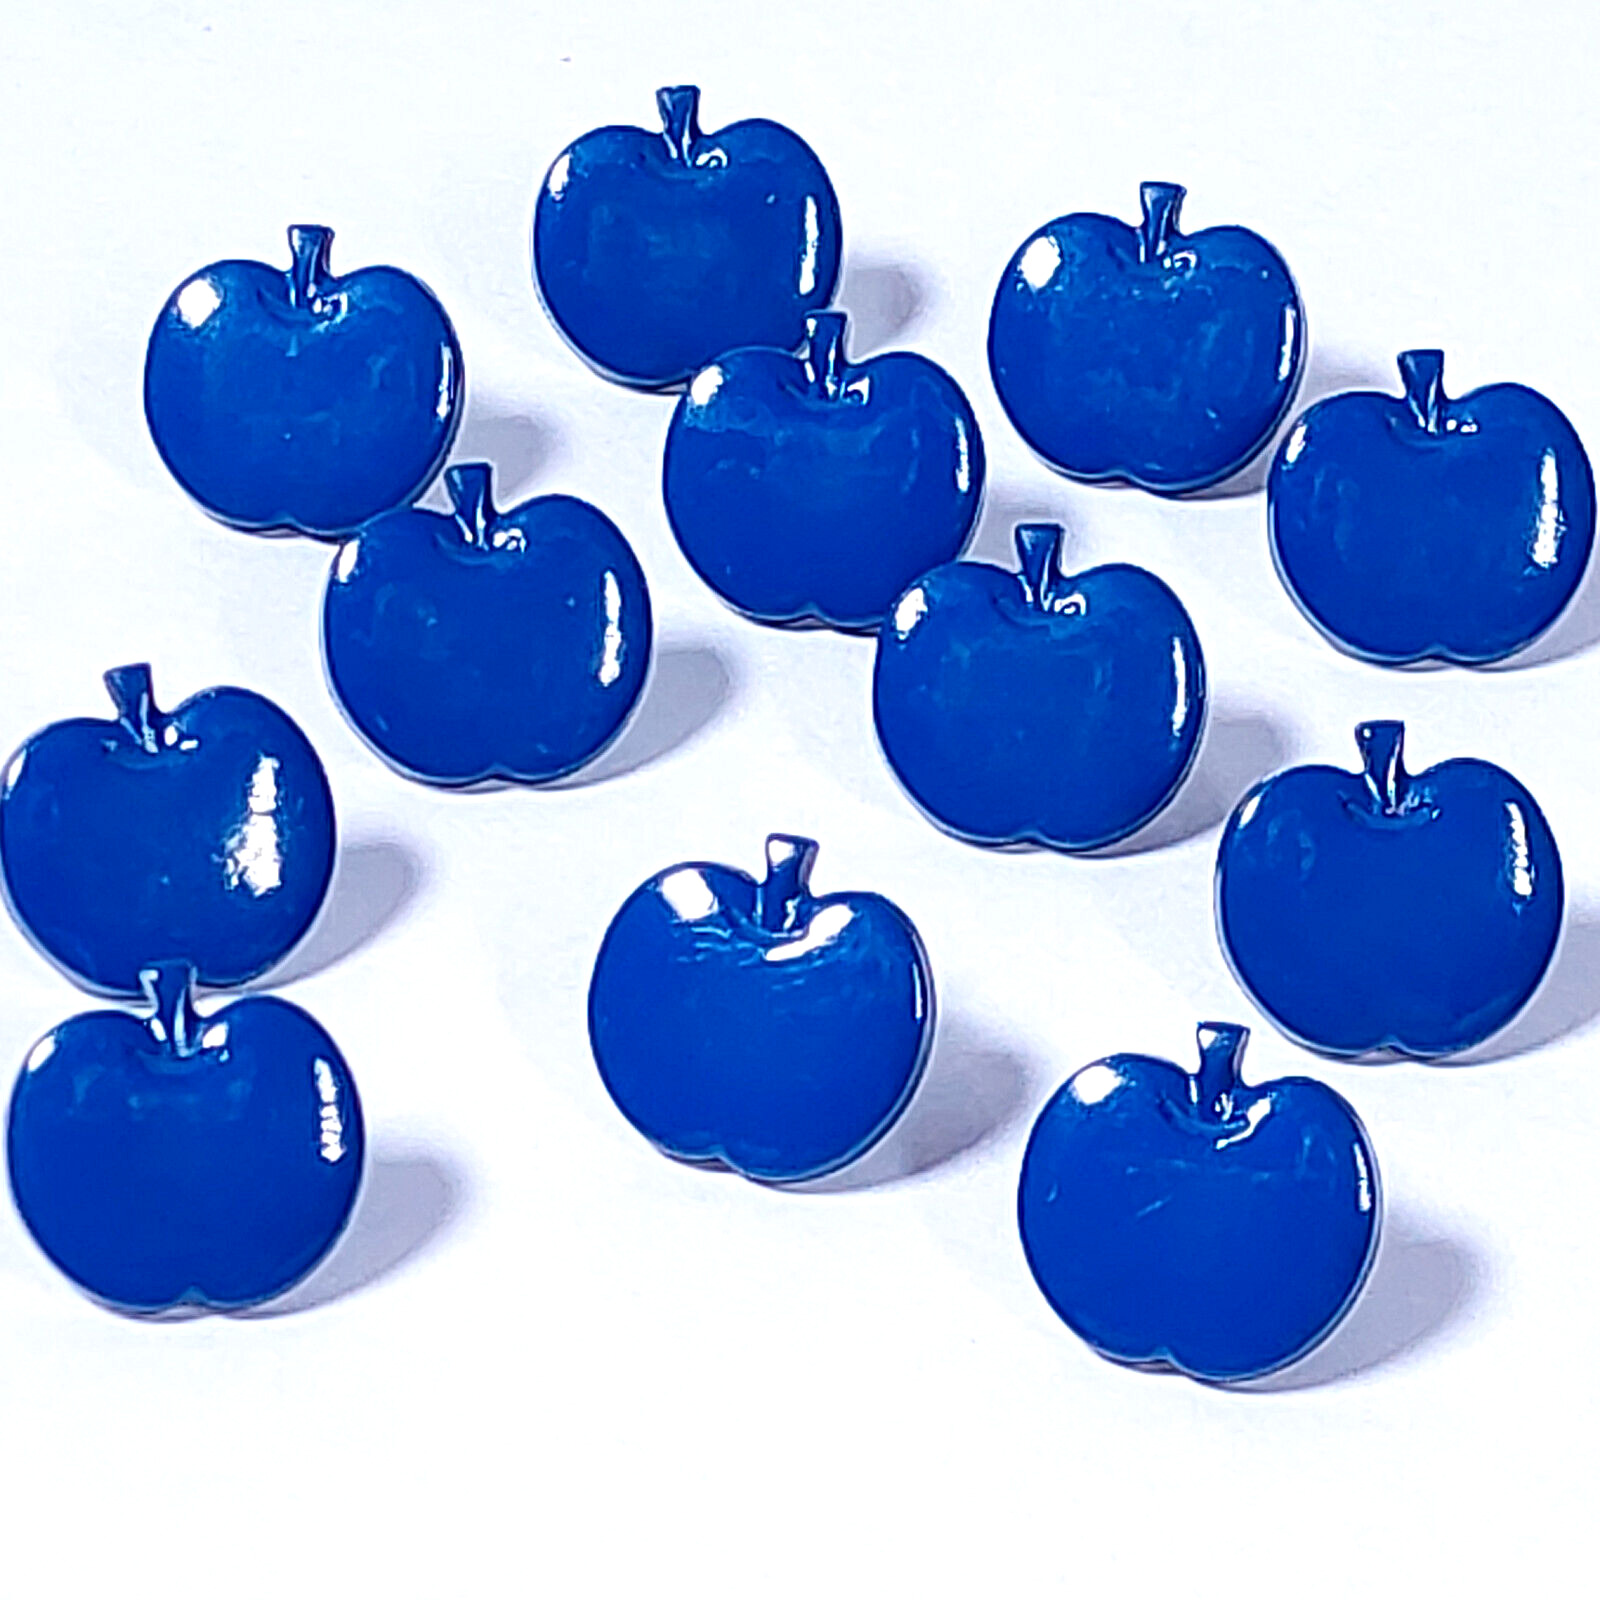 Vtg Dill Buttons 12 ct. Apple Blue 14mm Plastic Shank Childrens Sewing W Germany